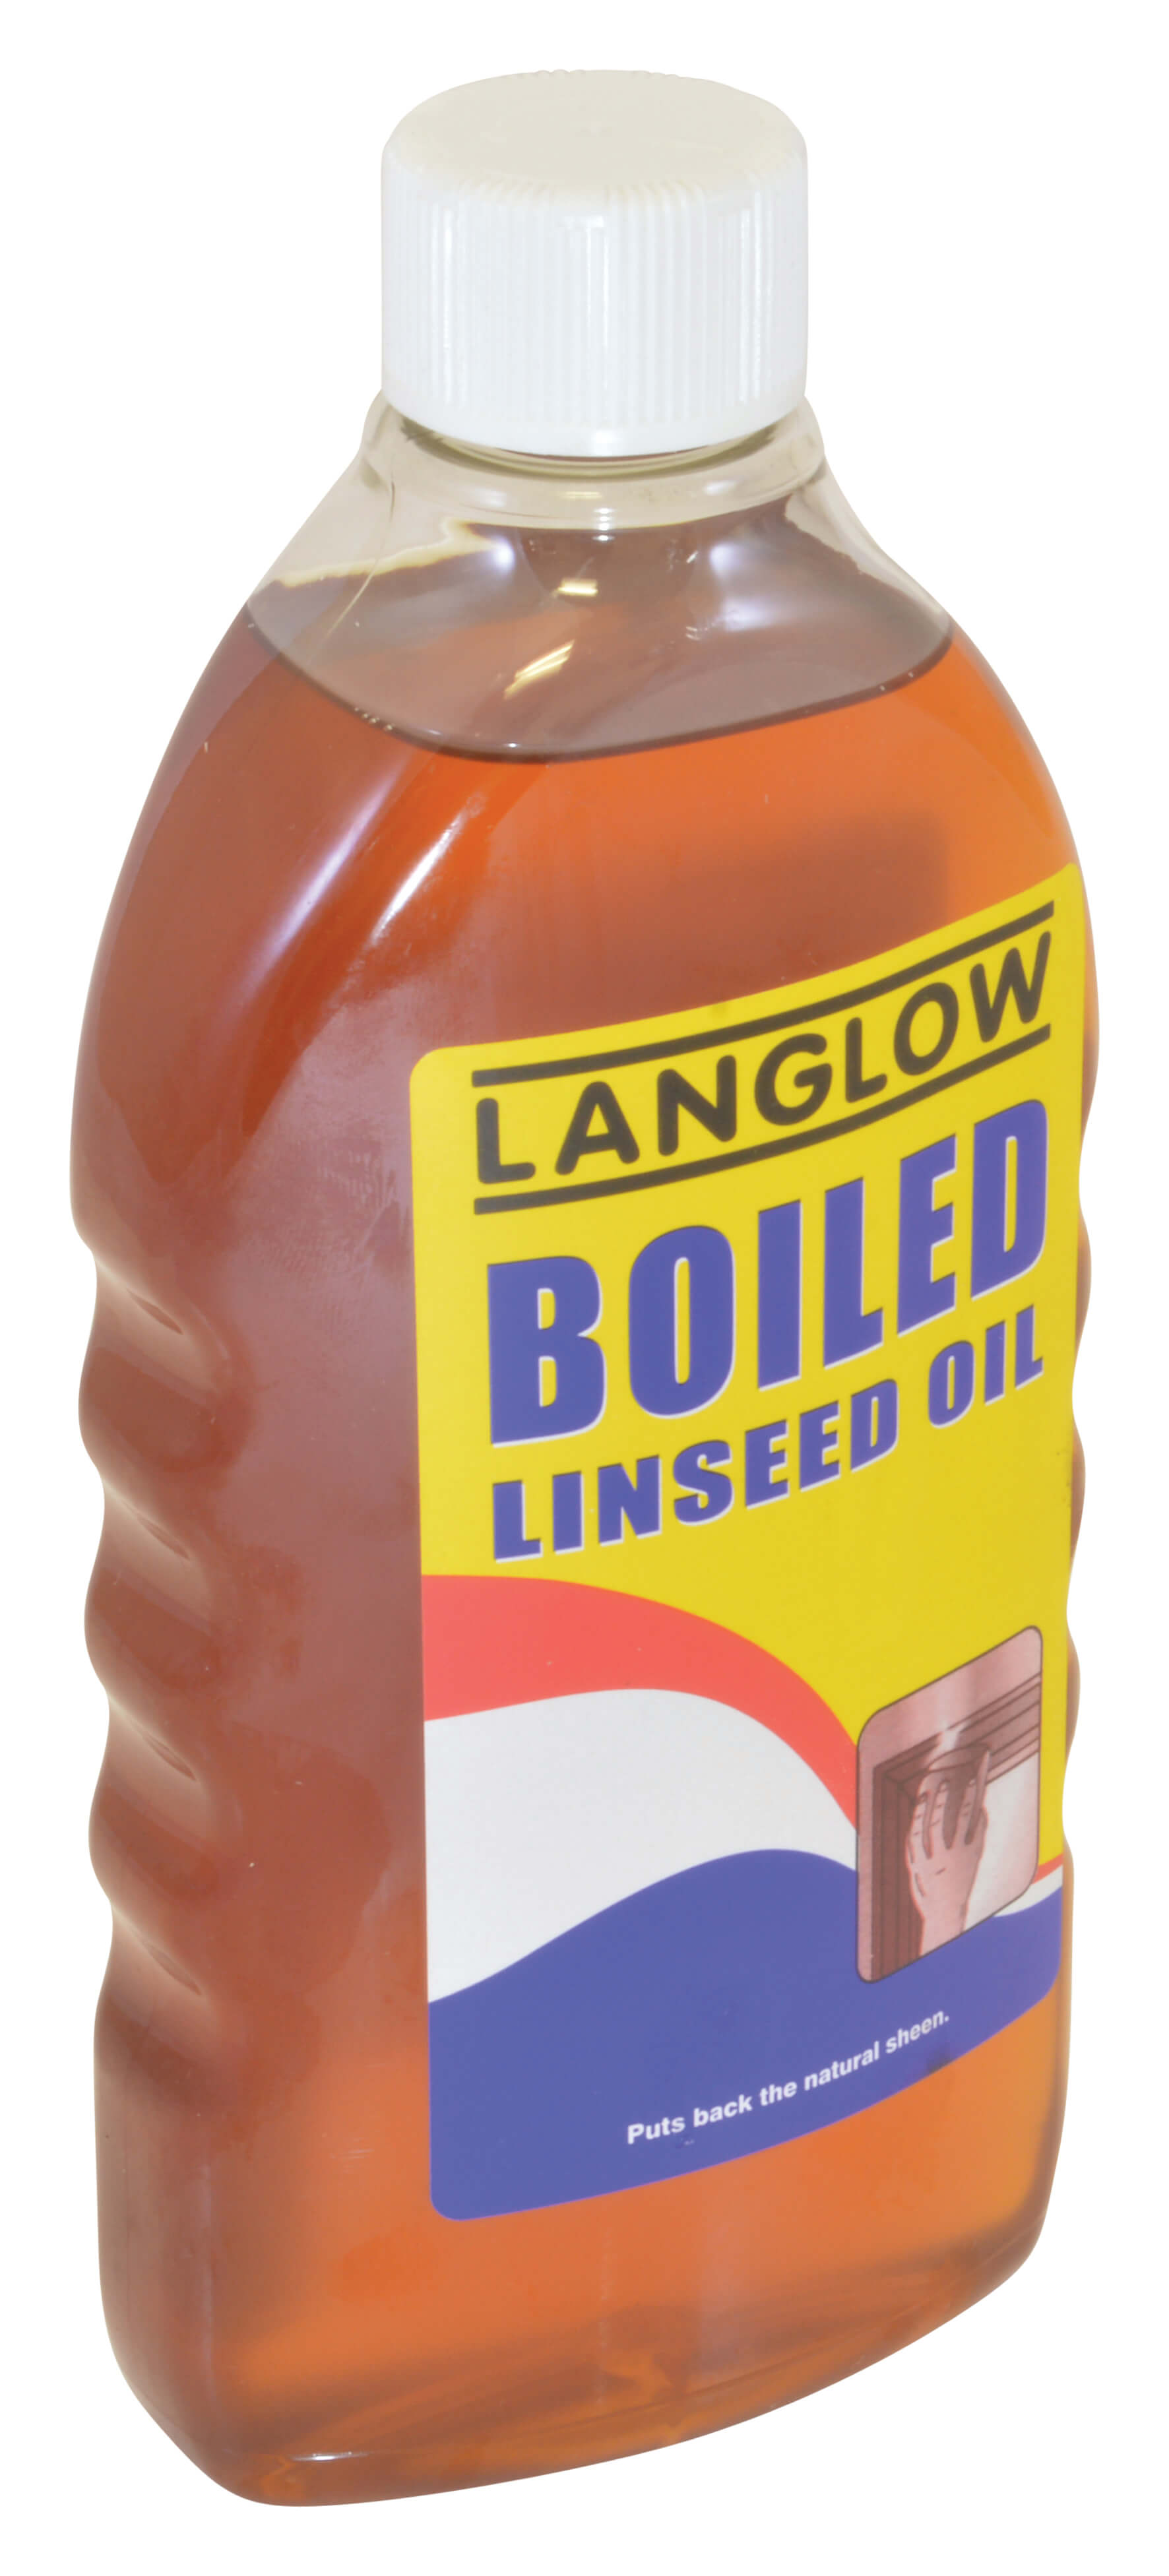 Boiled Linseed Oil - 500ml